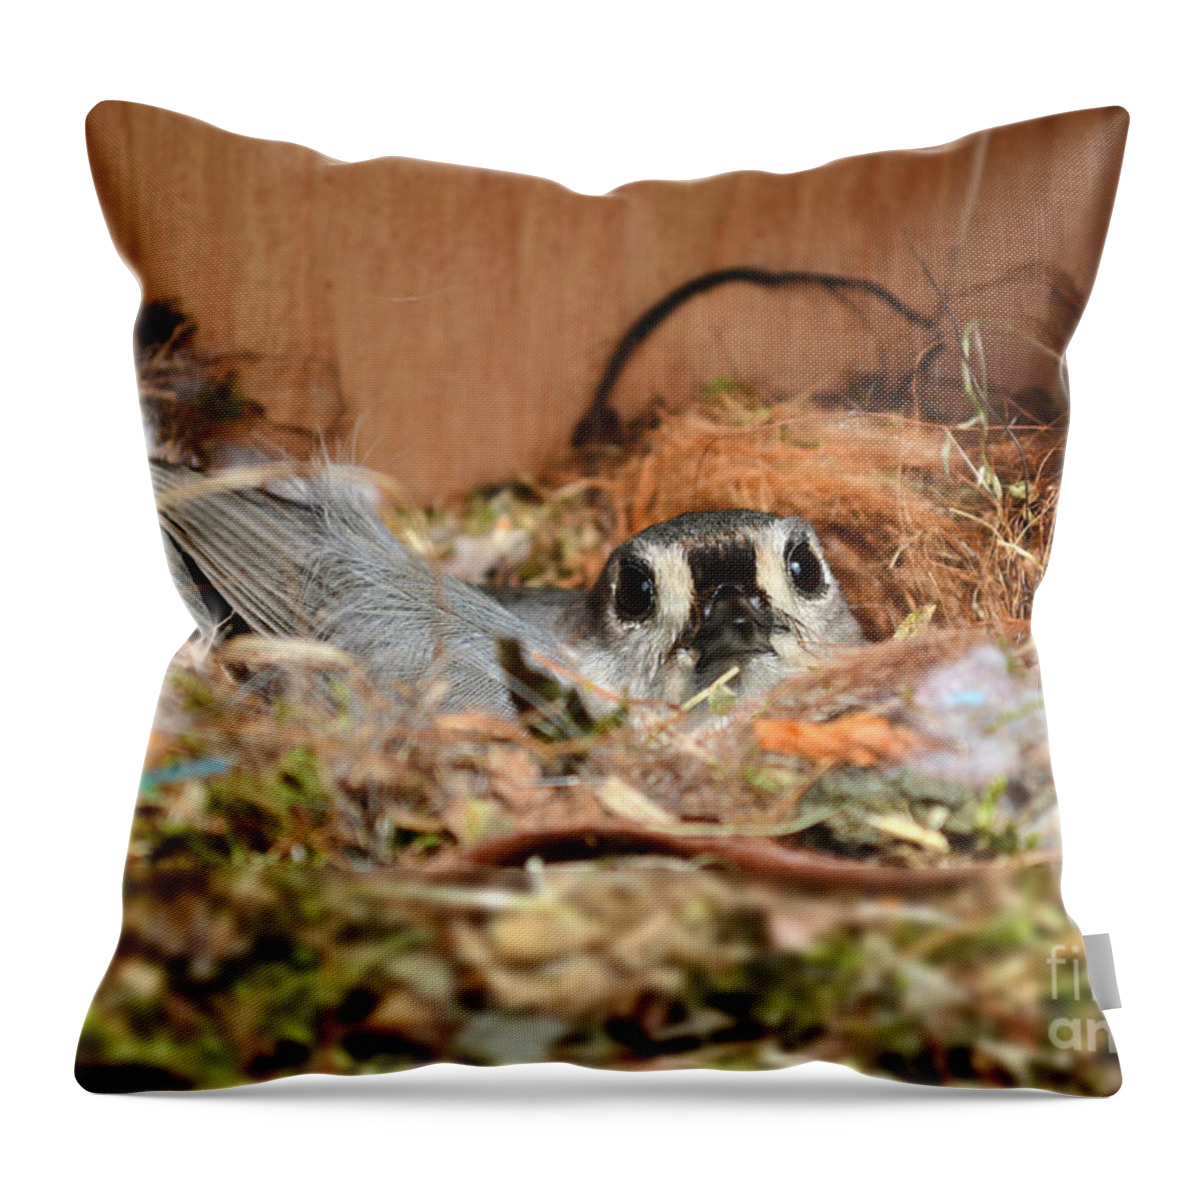 Titmouse Throw Pillow featuring the photograph Titmouse Nesting by Kathy Baccari